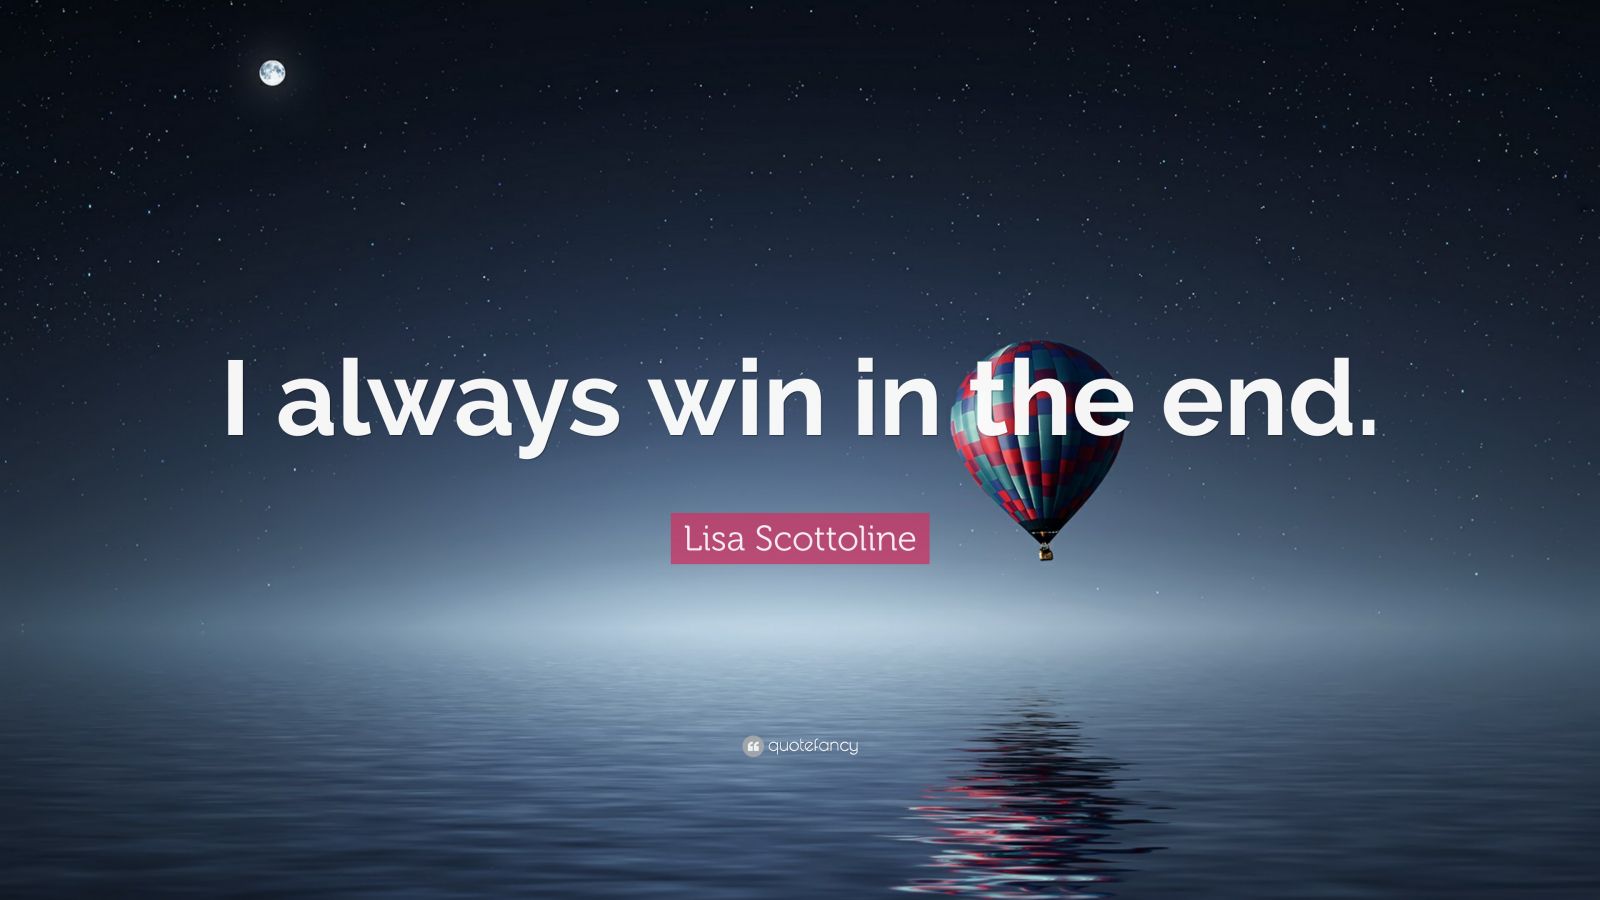 Lisa Scottoline Quote: “I always win in the end.”